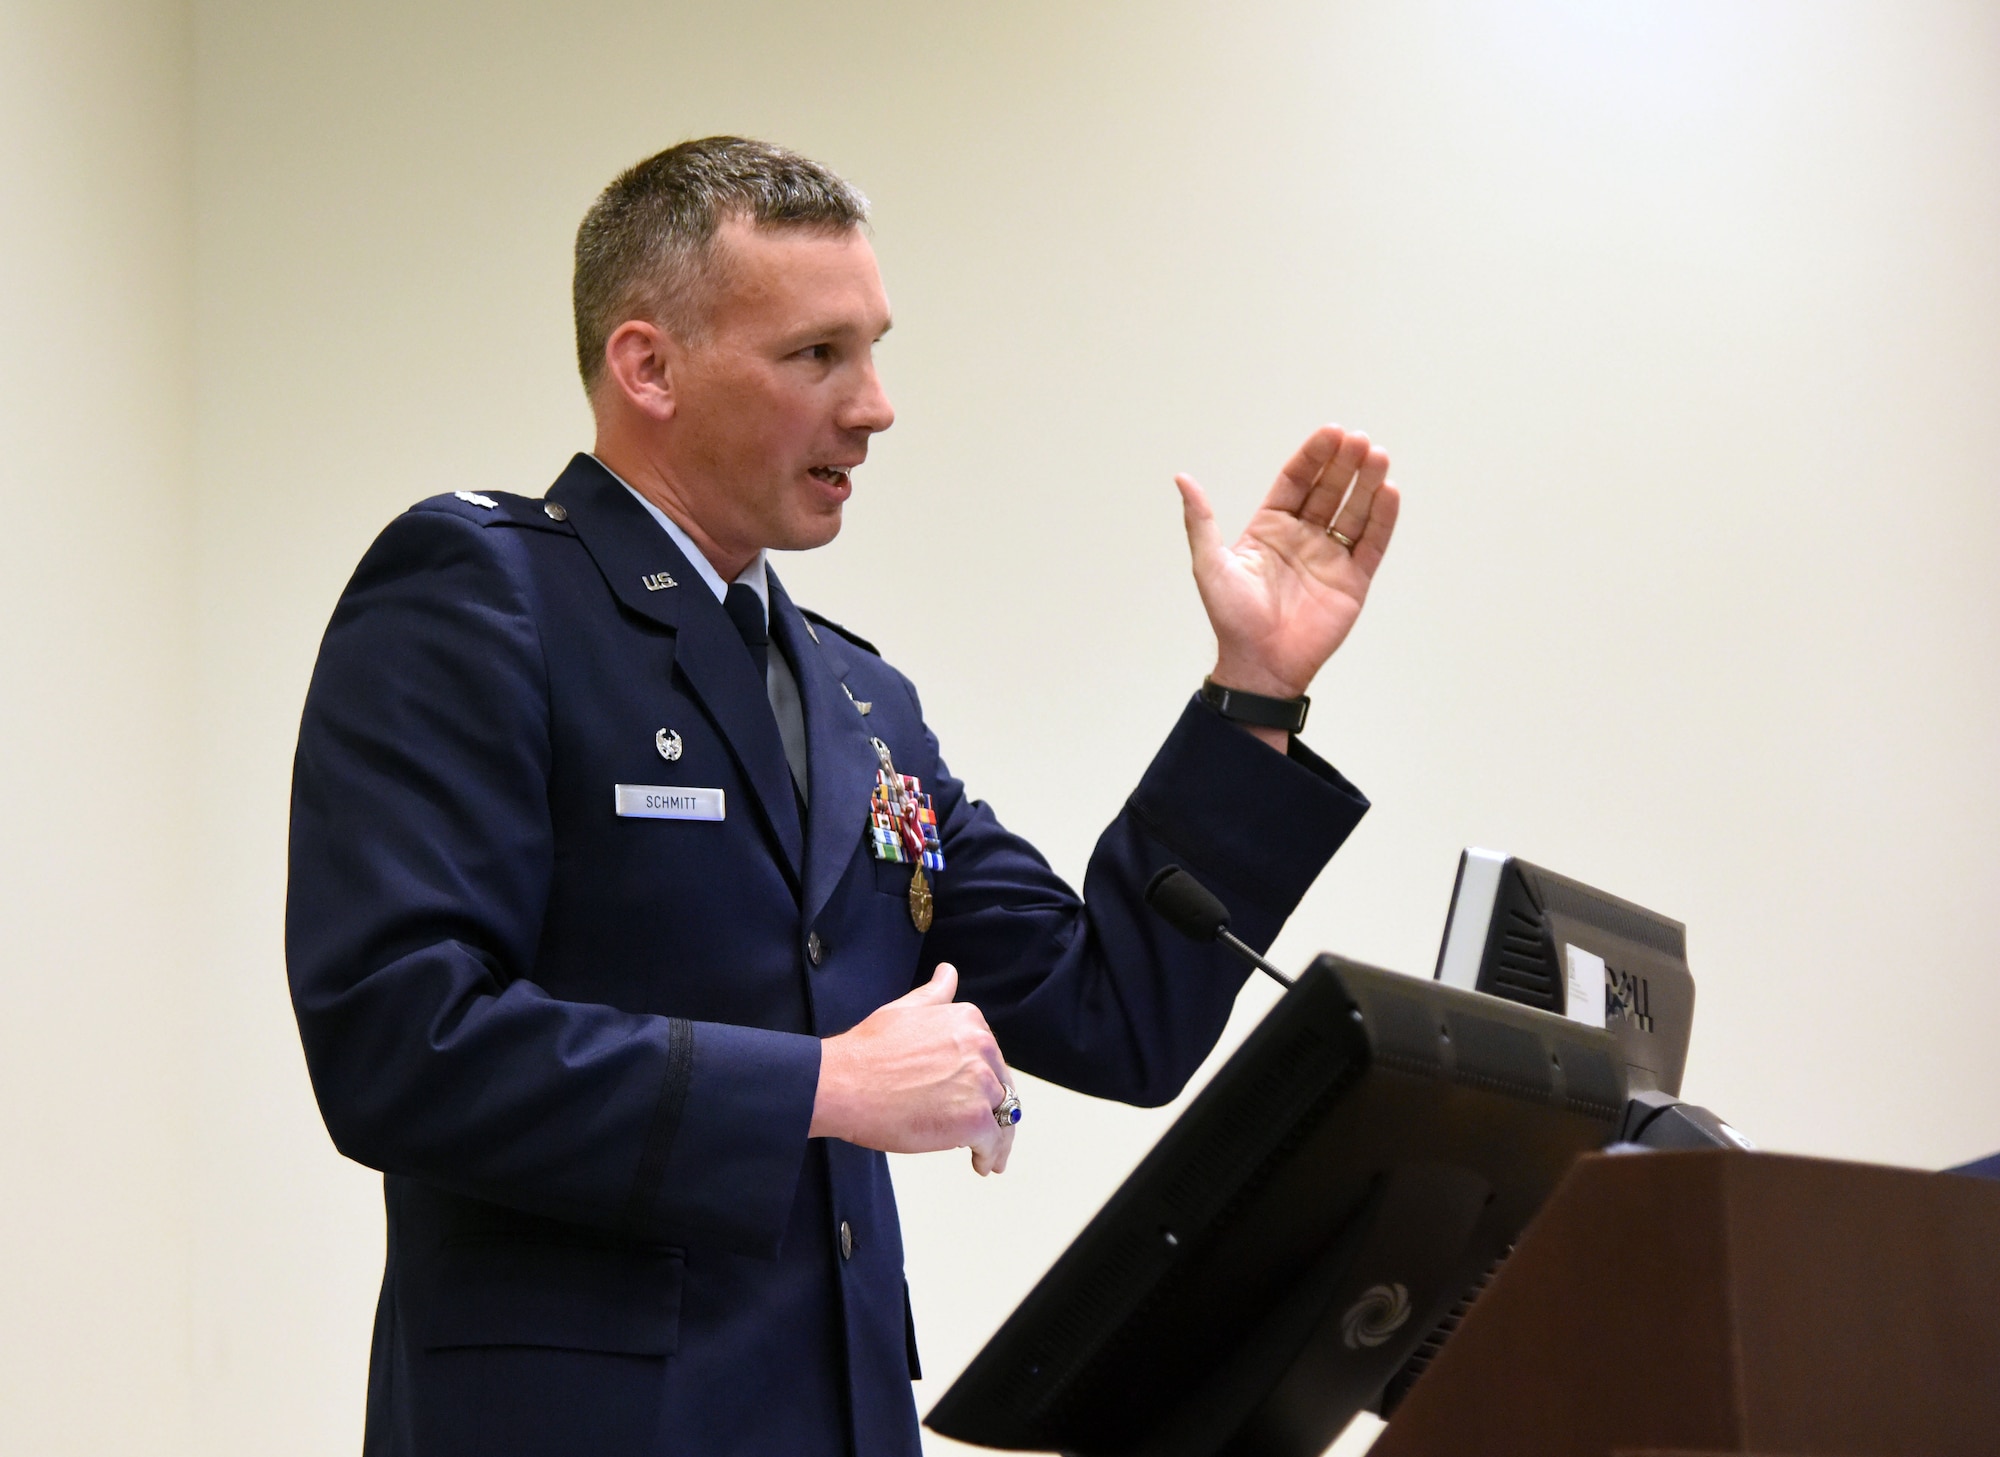 U.S. Air Force Lt. Col. Daniel Schmitt, outgoing 336th Training Squadron commander, delivers remarks during the 336th TRS change of command ceremony in the Roberts Consolidated Aircraft Maintenance Facility at Keesler Air Force Base, Mississippi, July 23, 2018. Schmitt relinquished command to Maj. Jill Heliker, incoming 336th TRS commander. (U.S. Air Force photo by Kemberly Groue)